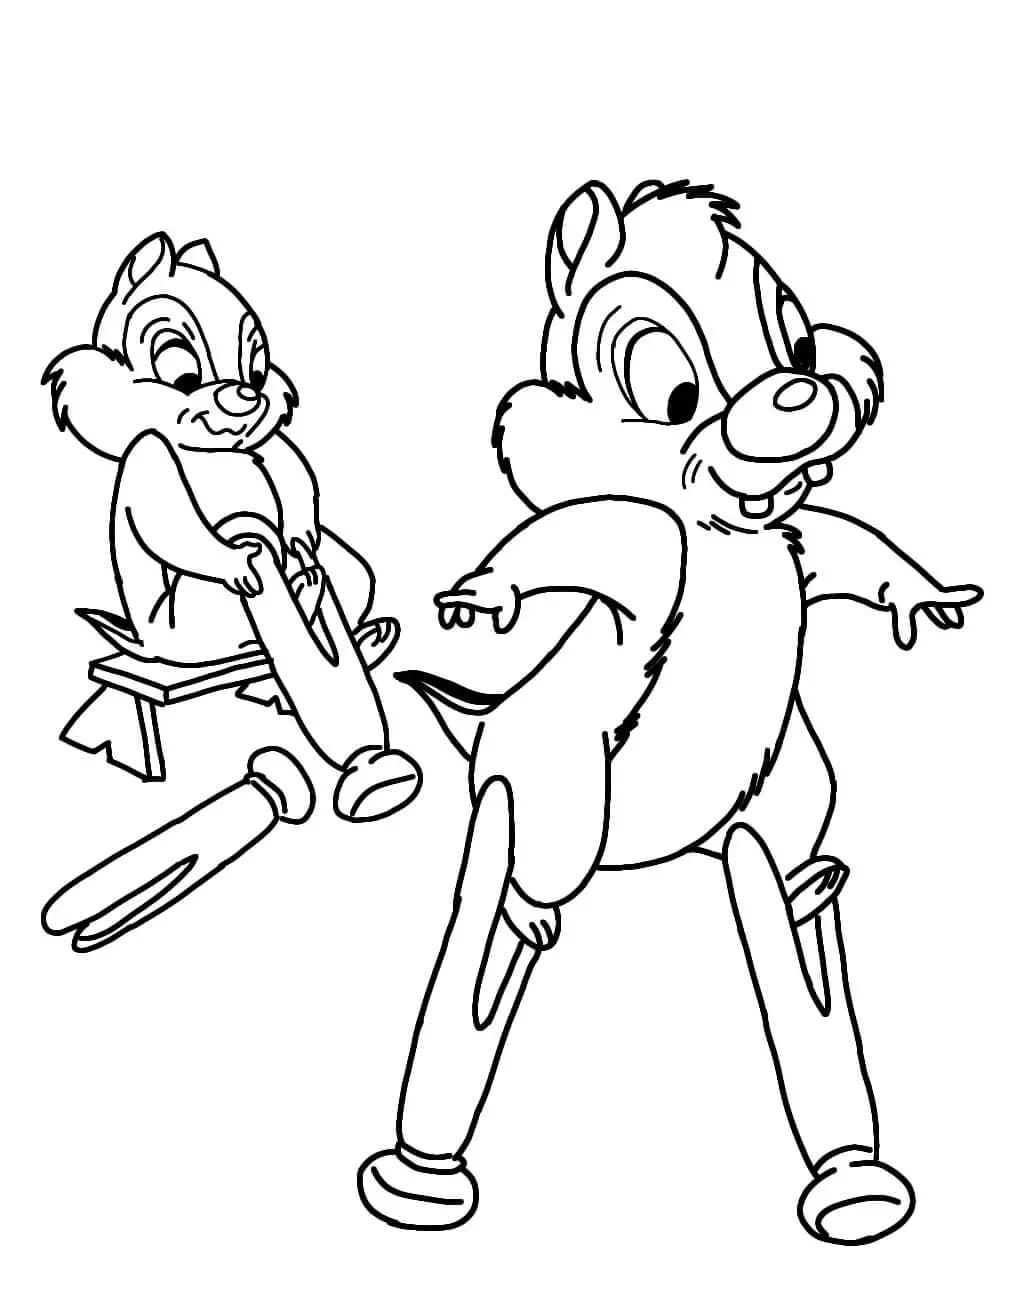 Coloring page Chip and Dale Chip and Dale are having fun